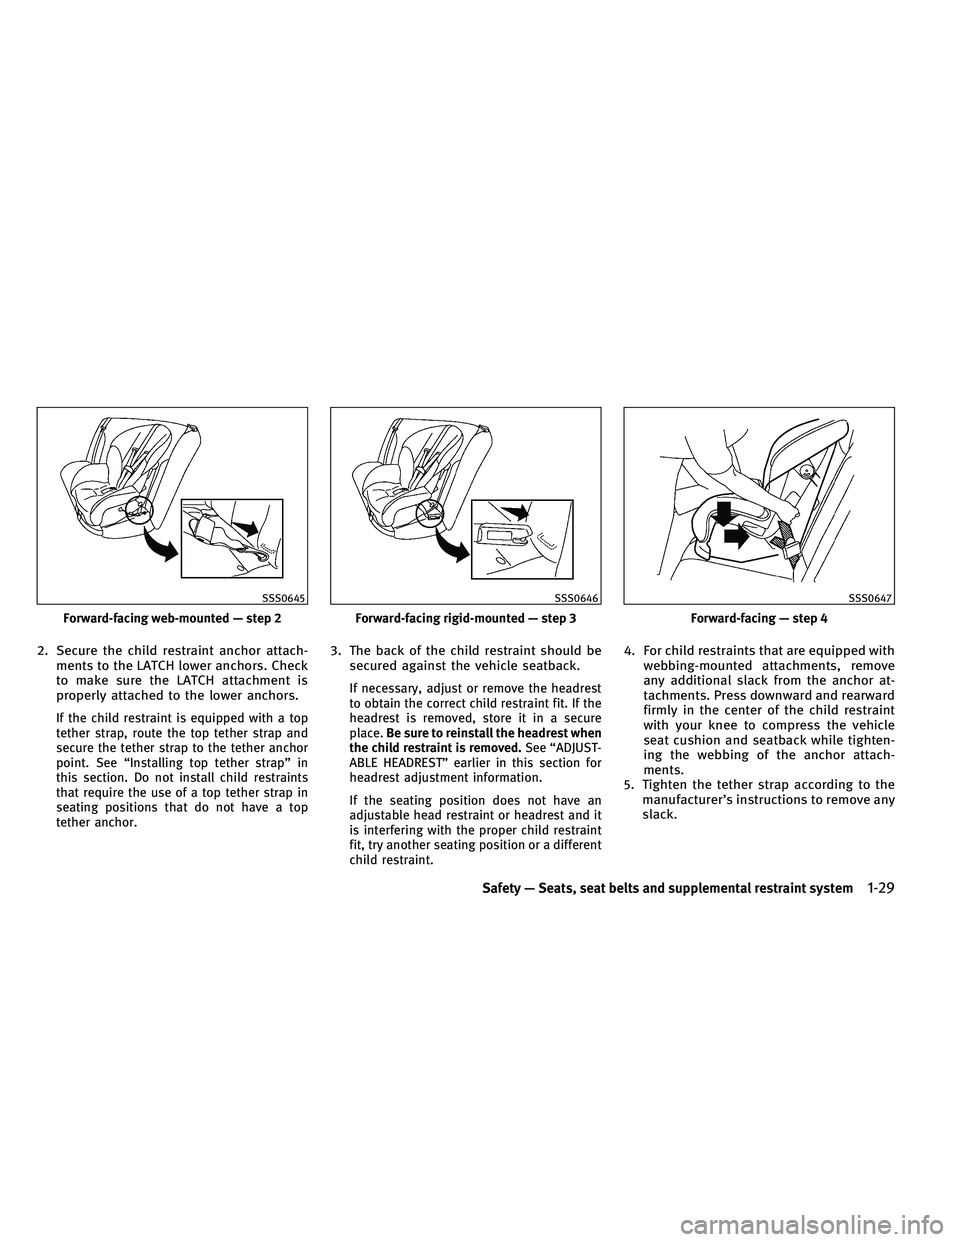 INFINITI EX 2011 Service Manual 2. Secure the child restraint anchor attach-ments to the LATCH lower anchors. Check
to make sure the LATCH attachment is
properly attached to the lower anchors.
If the child restraint is equipped with